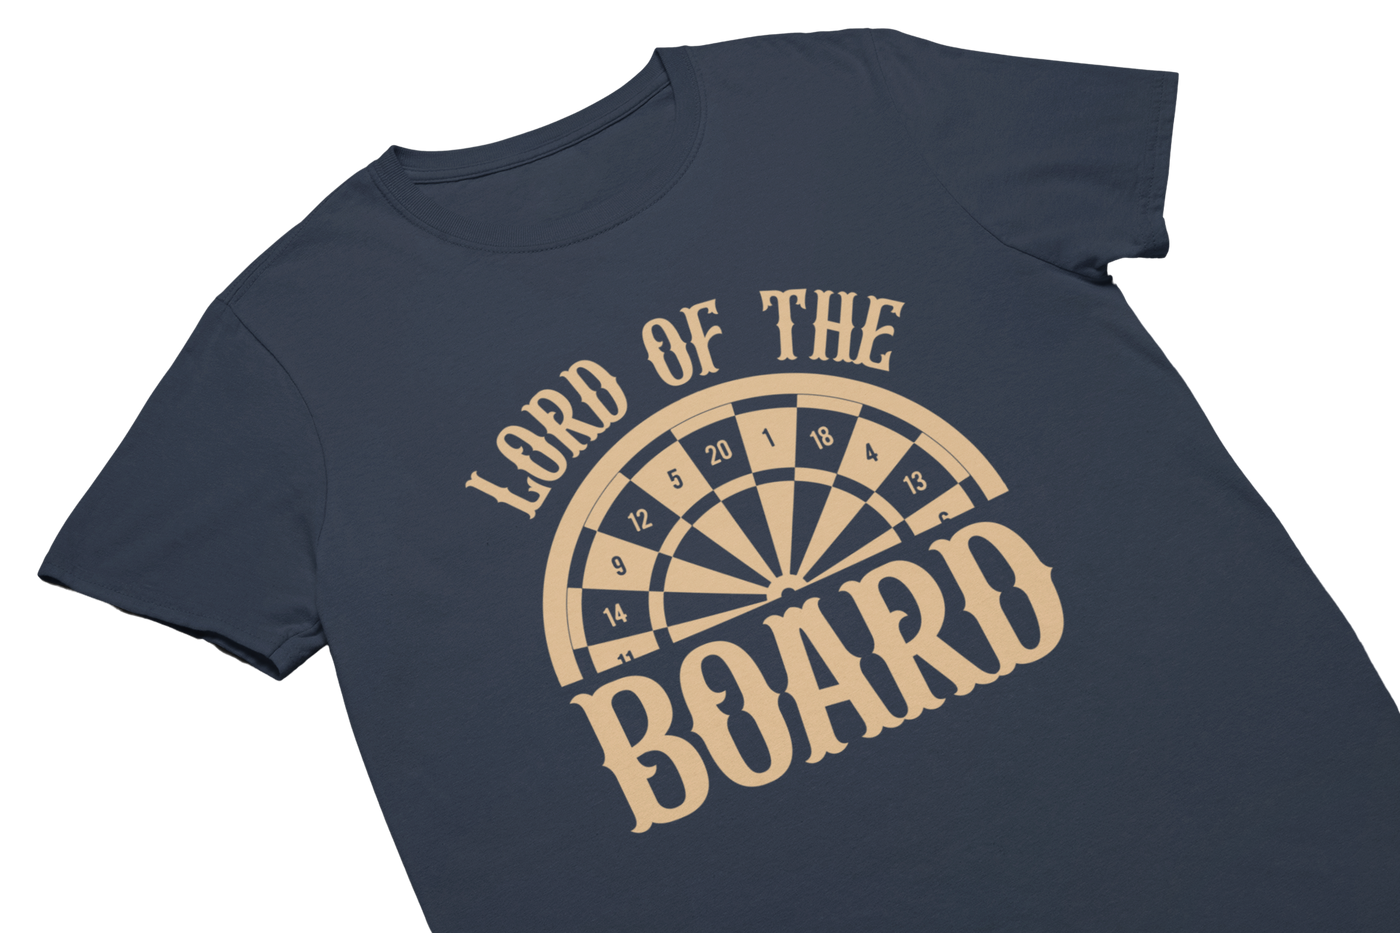 LORD OF THE BOARD - T-Shirt Navy